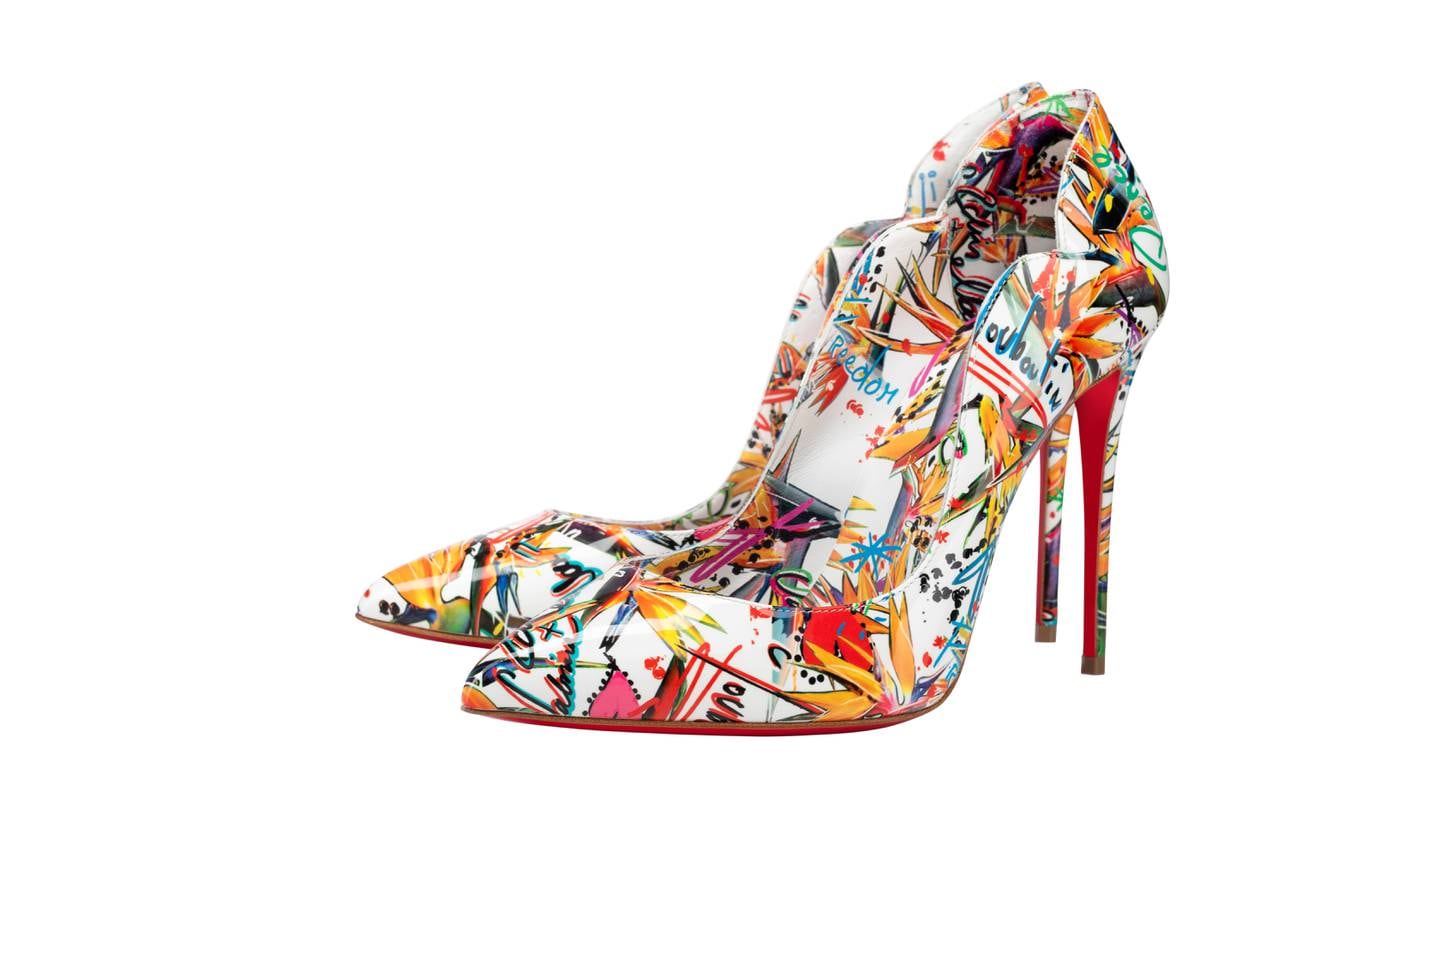 Christian Louboutin's "Walk a Mile" collection features a "freedom" print on his classic "So Kate" pump.